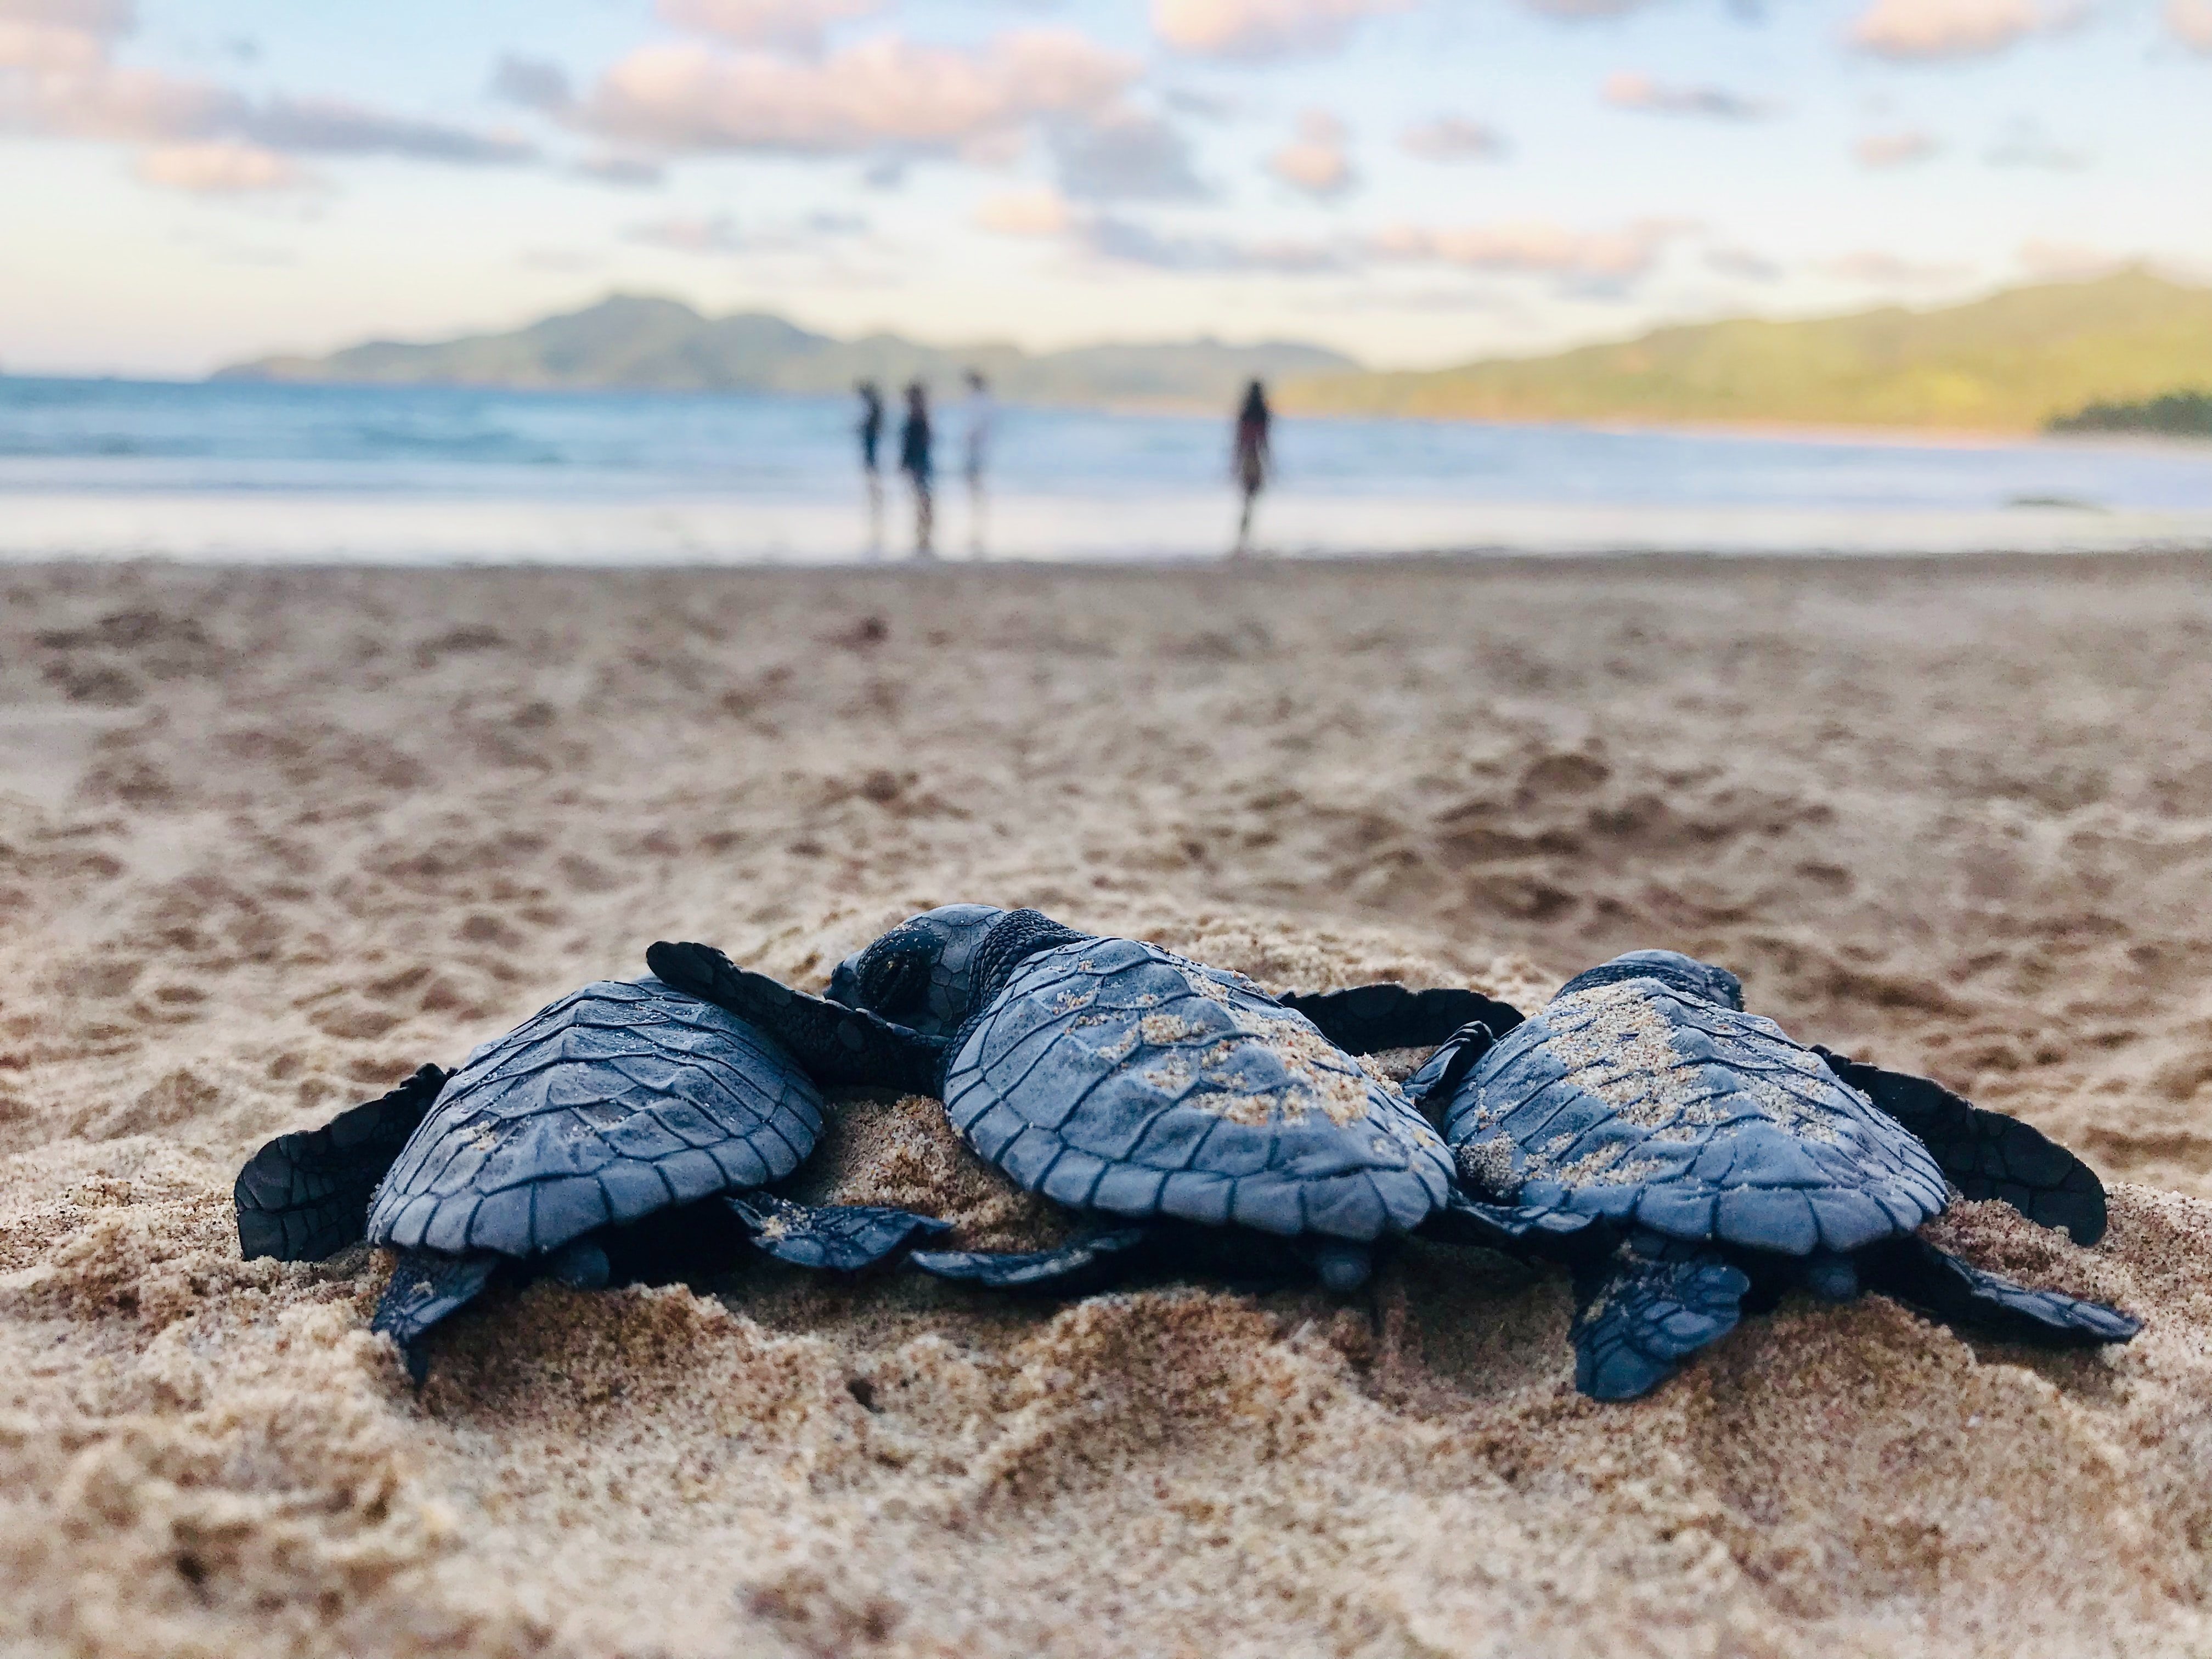 Three baby turtles on the sand in front of the sea 